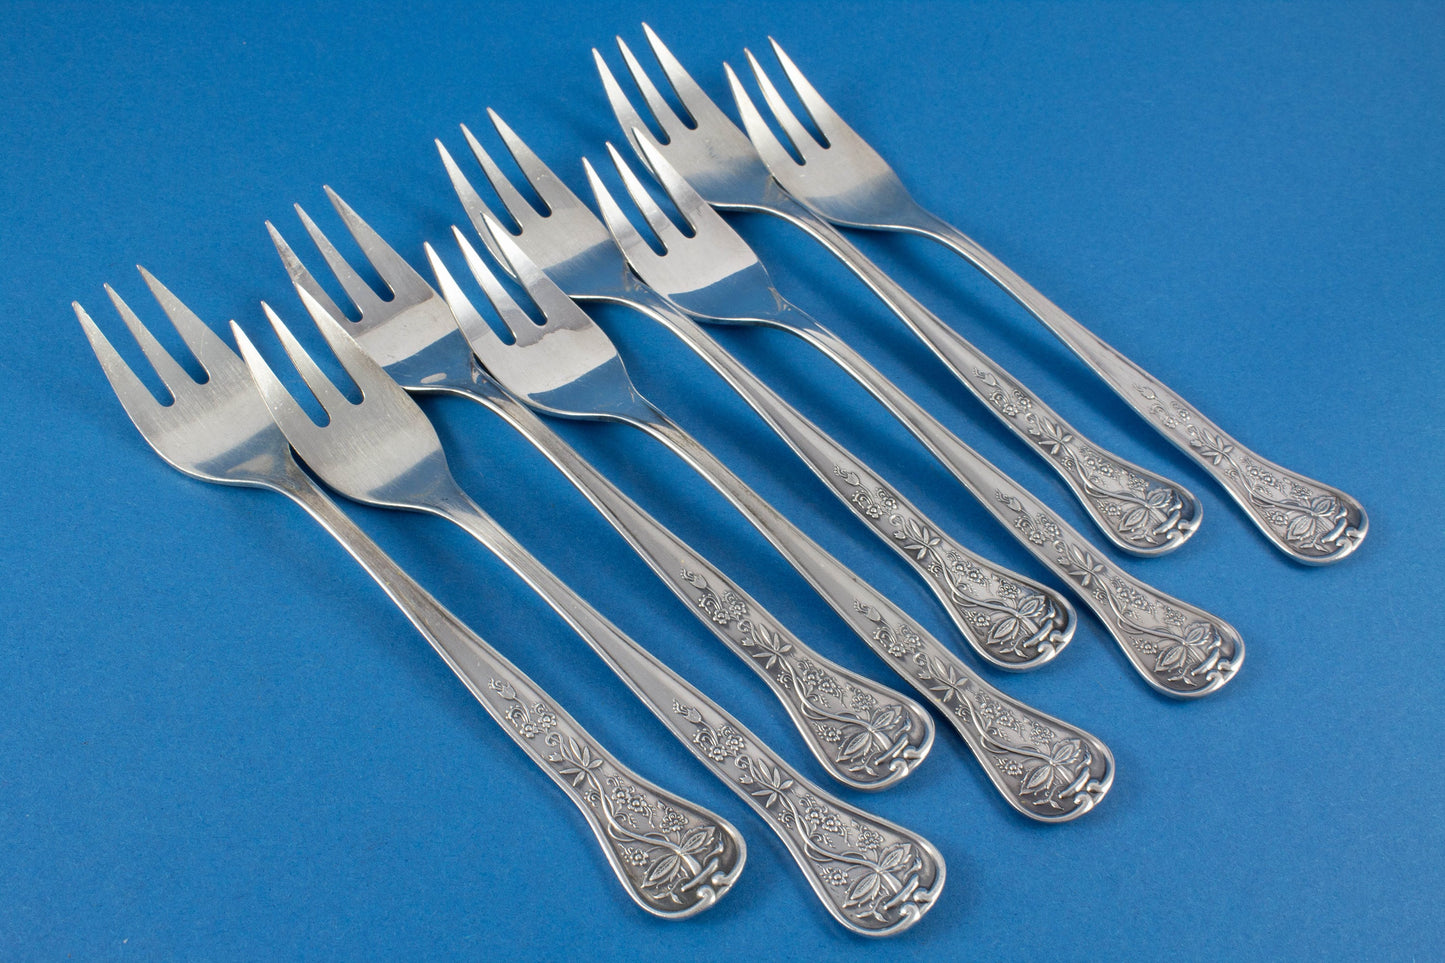 8 beautiful cake forks in Art Nouveau style, Hutschenreuther